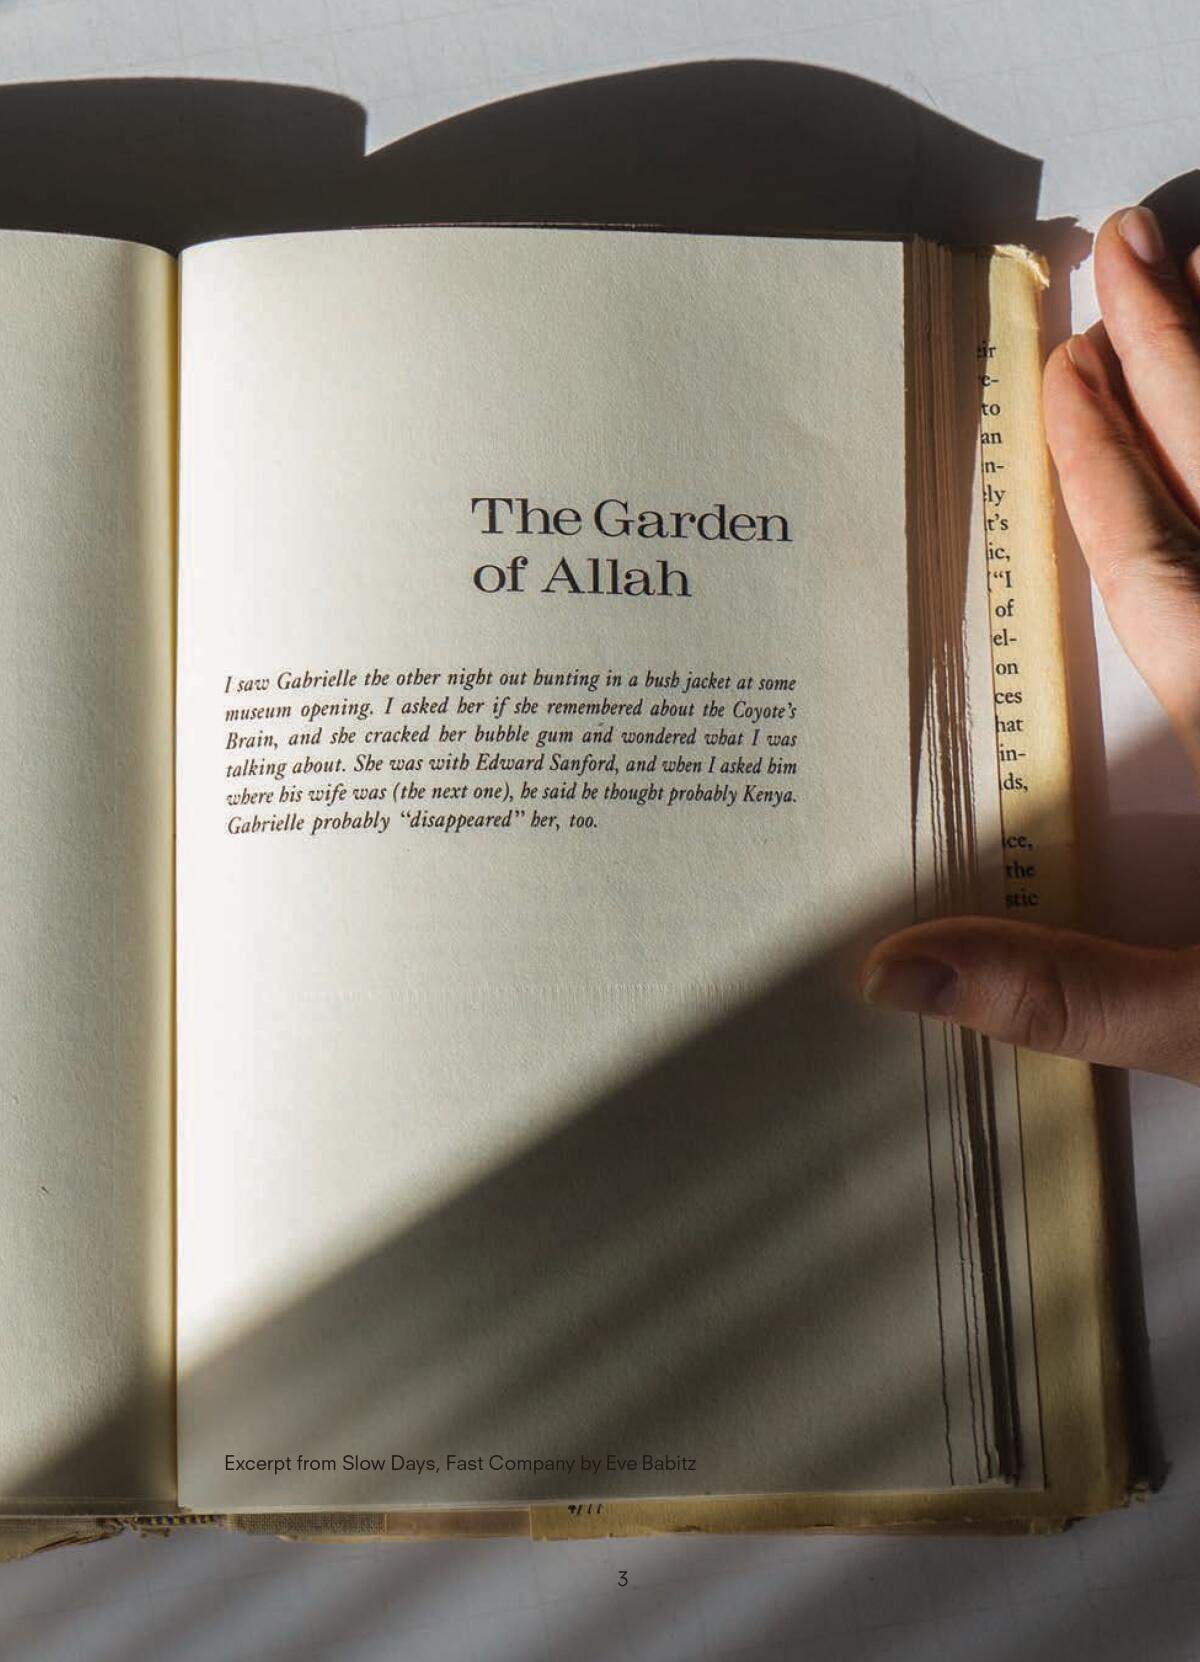 A book page with the chapter title "The Garden of Allah" at its top.